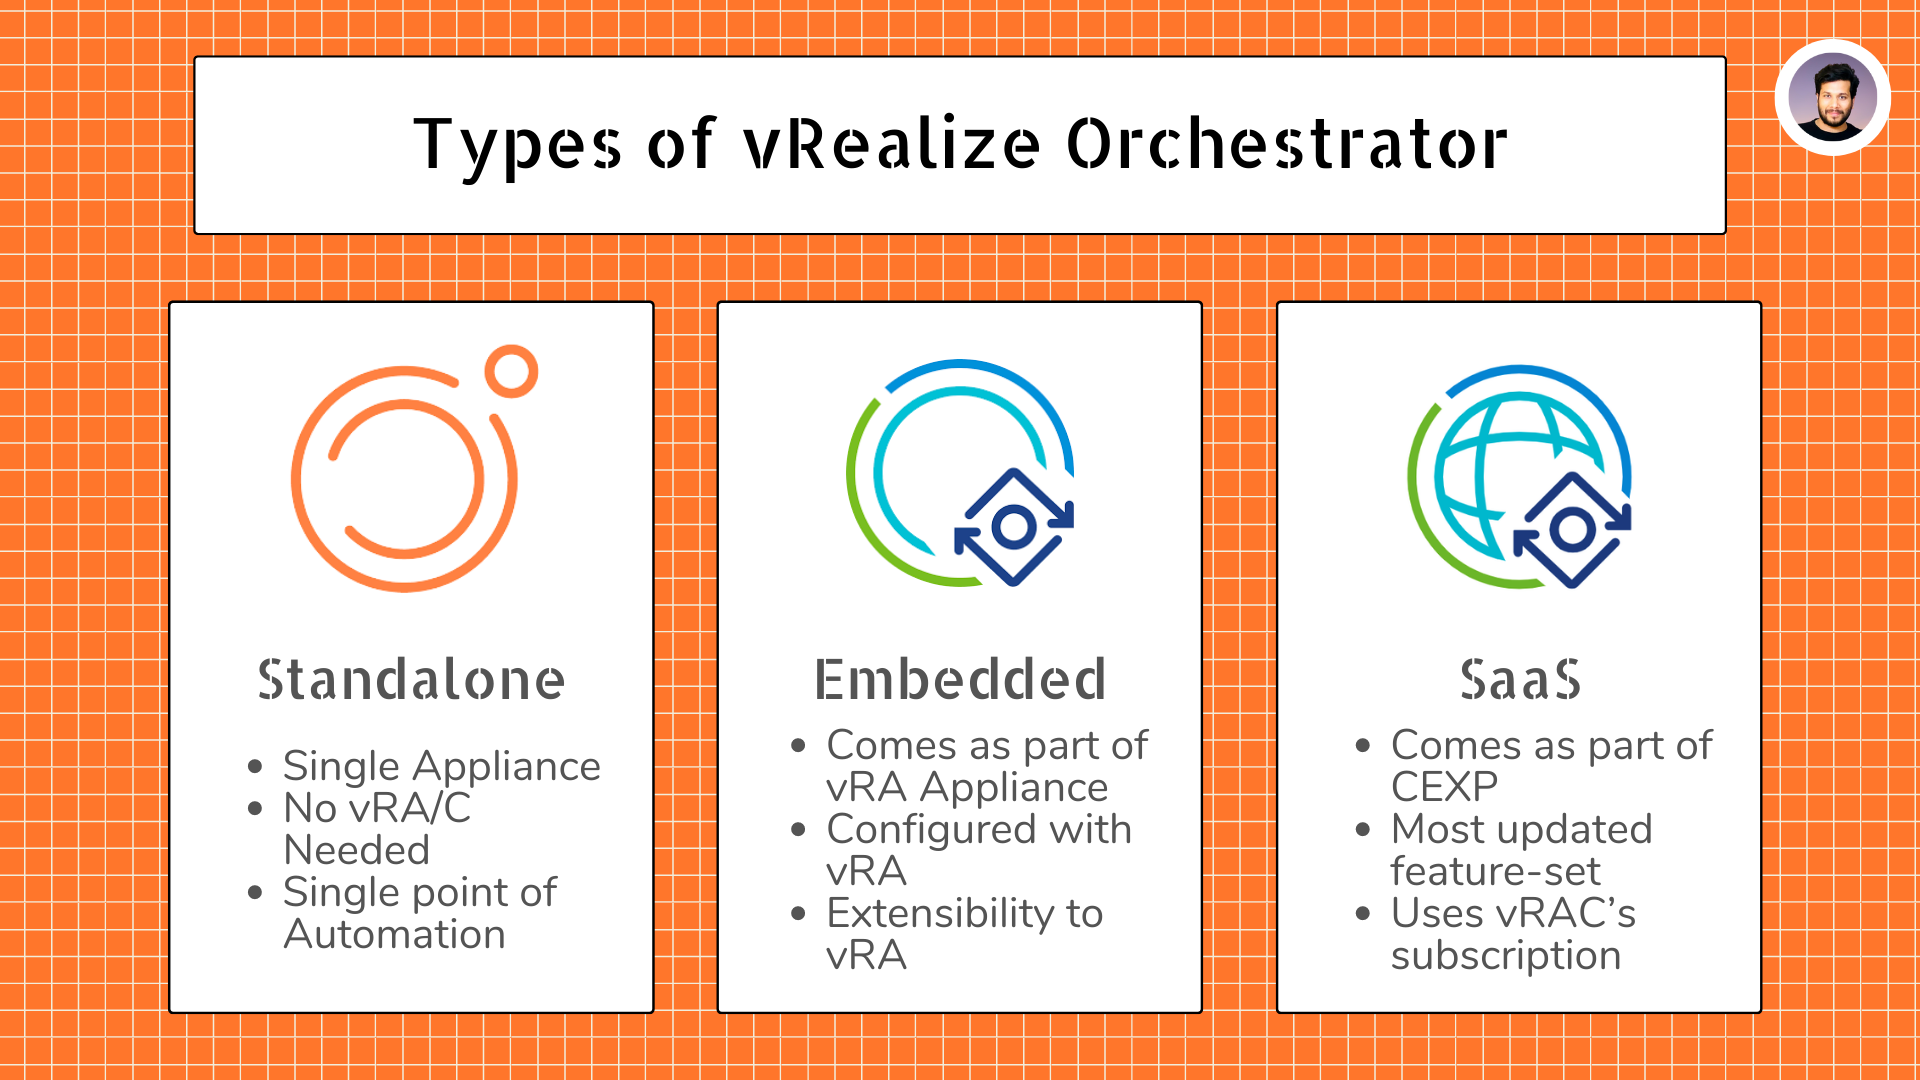 Deployment types of vRealize Orchestrator